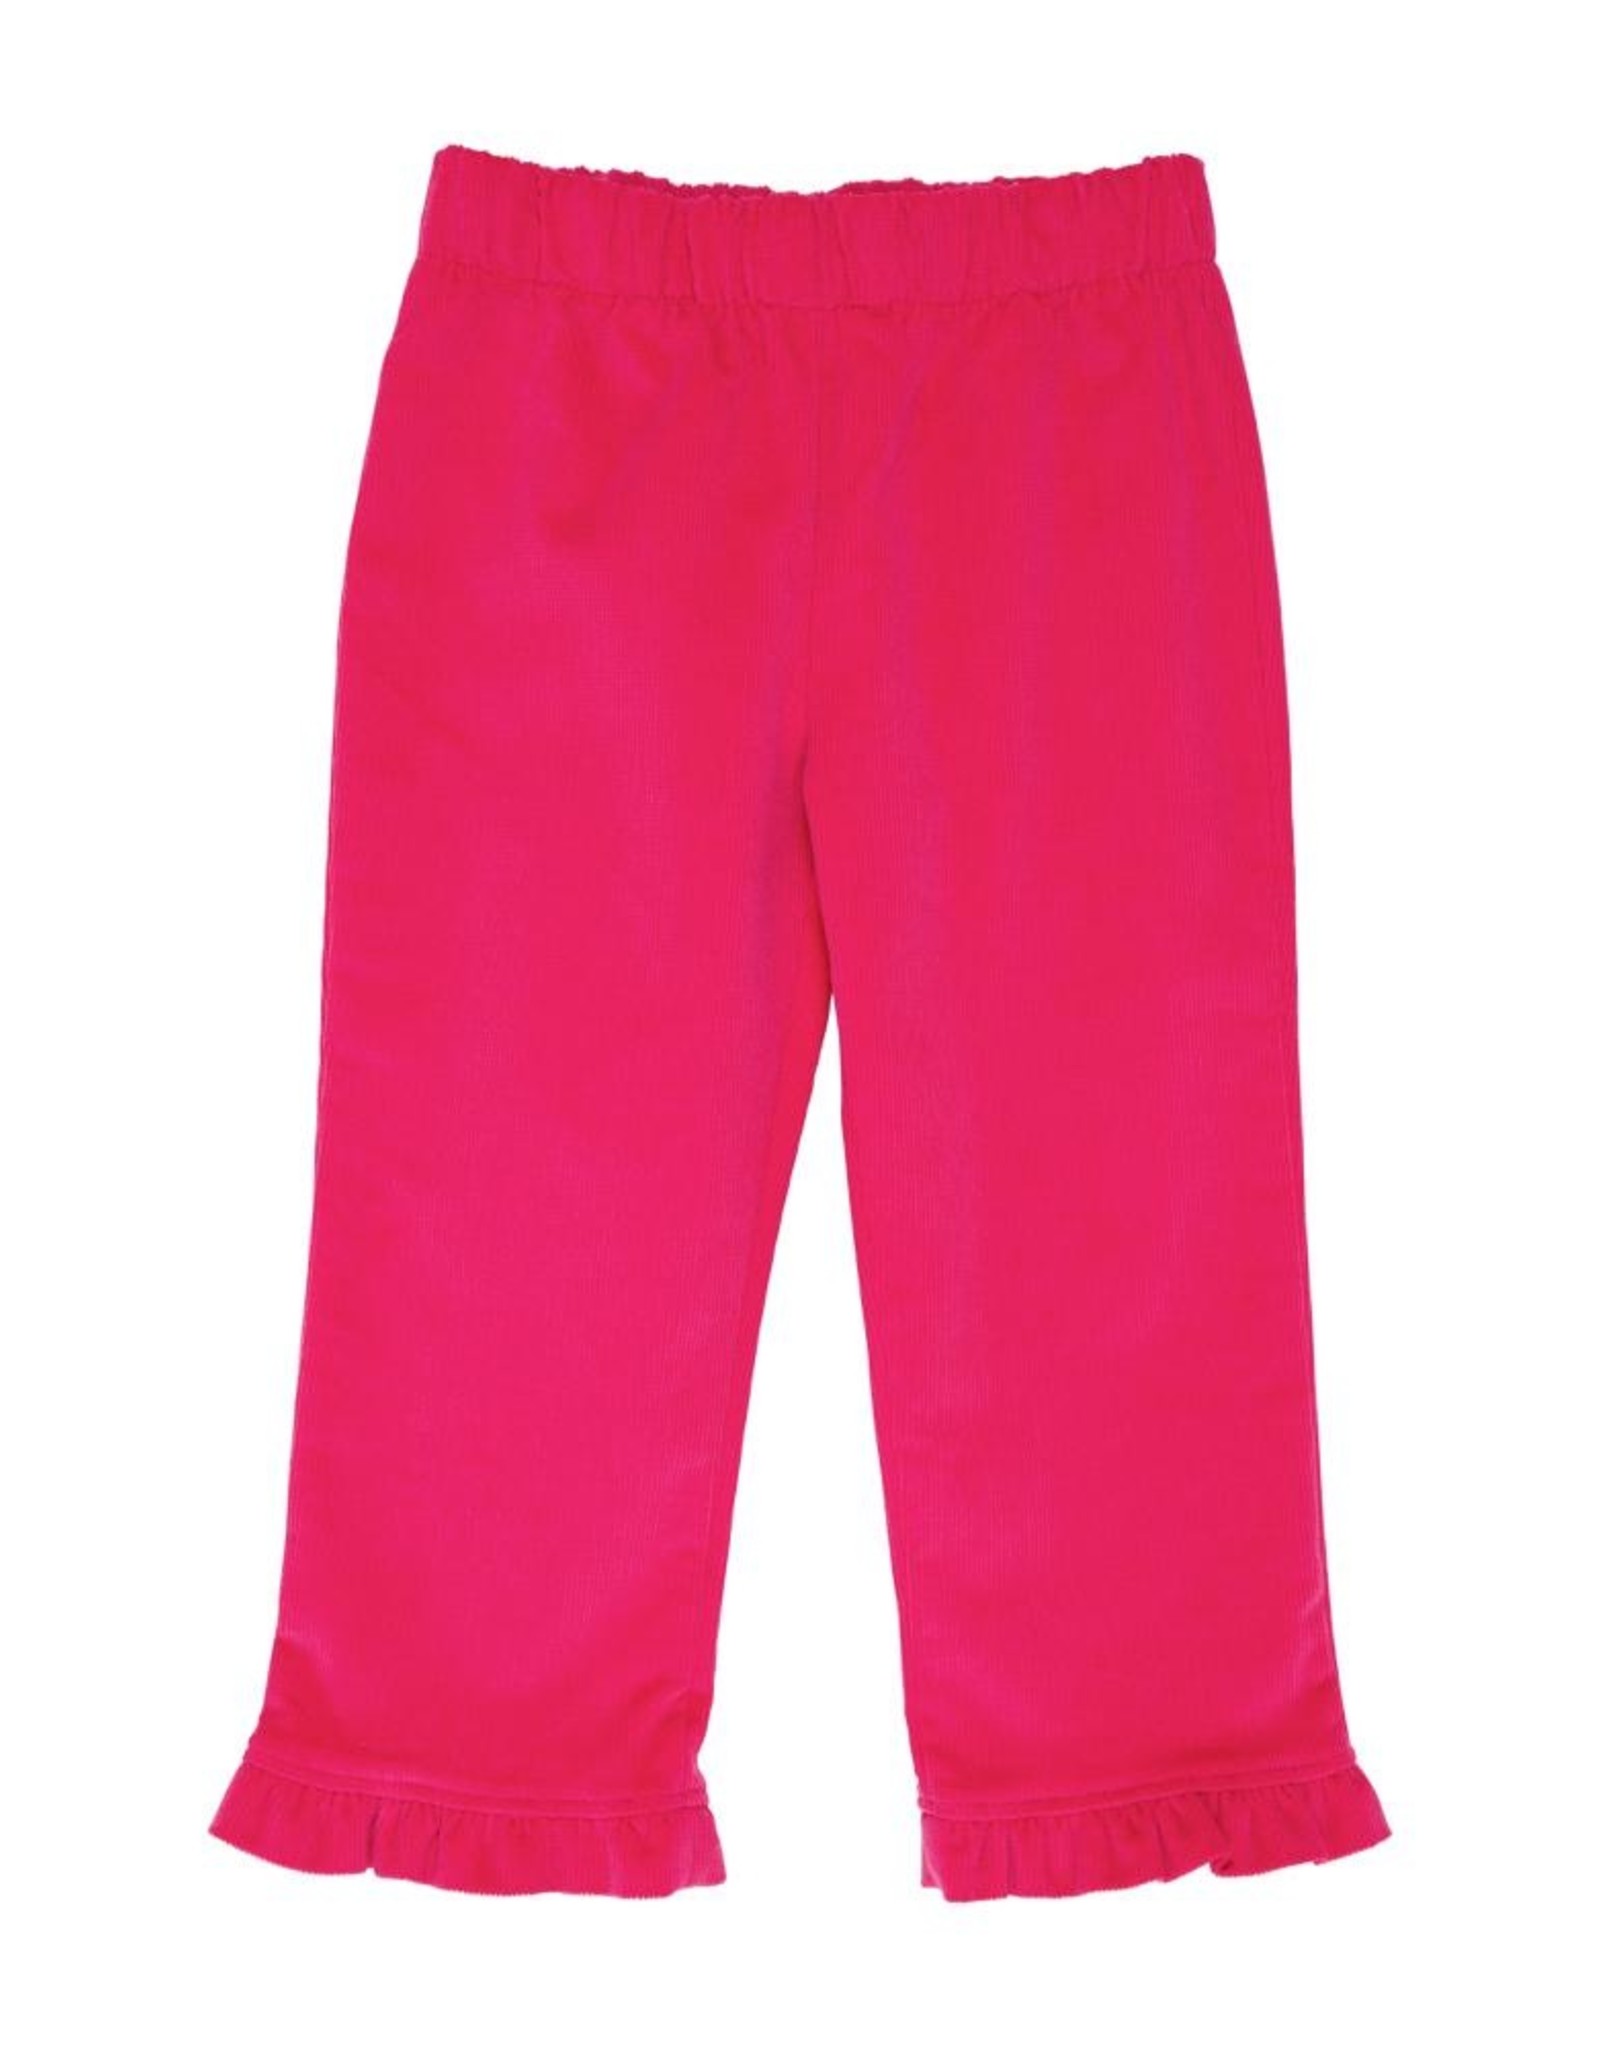 The Beaufort Bonnet Company Princeton Pants in Raleigh Raspberry Cord